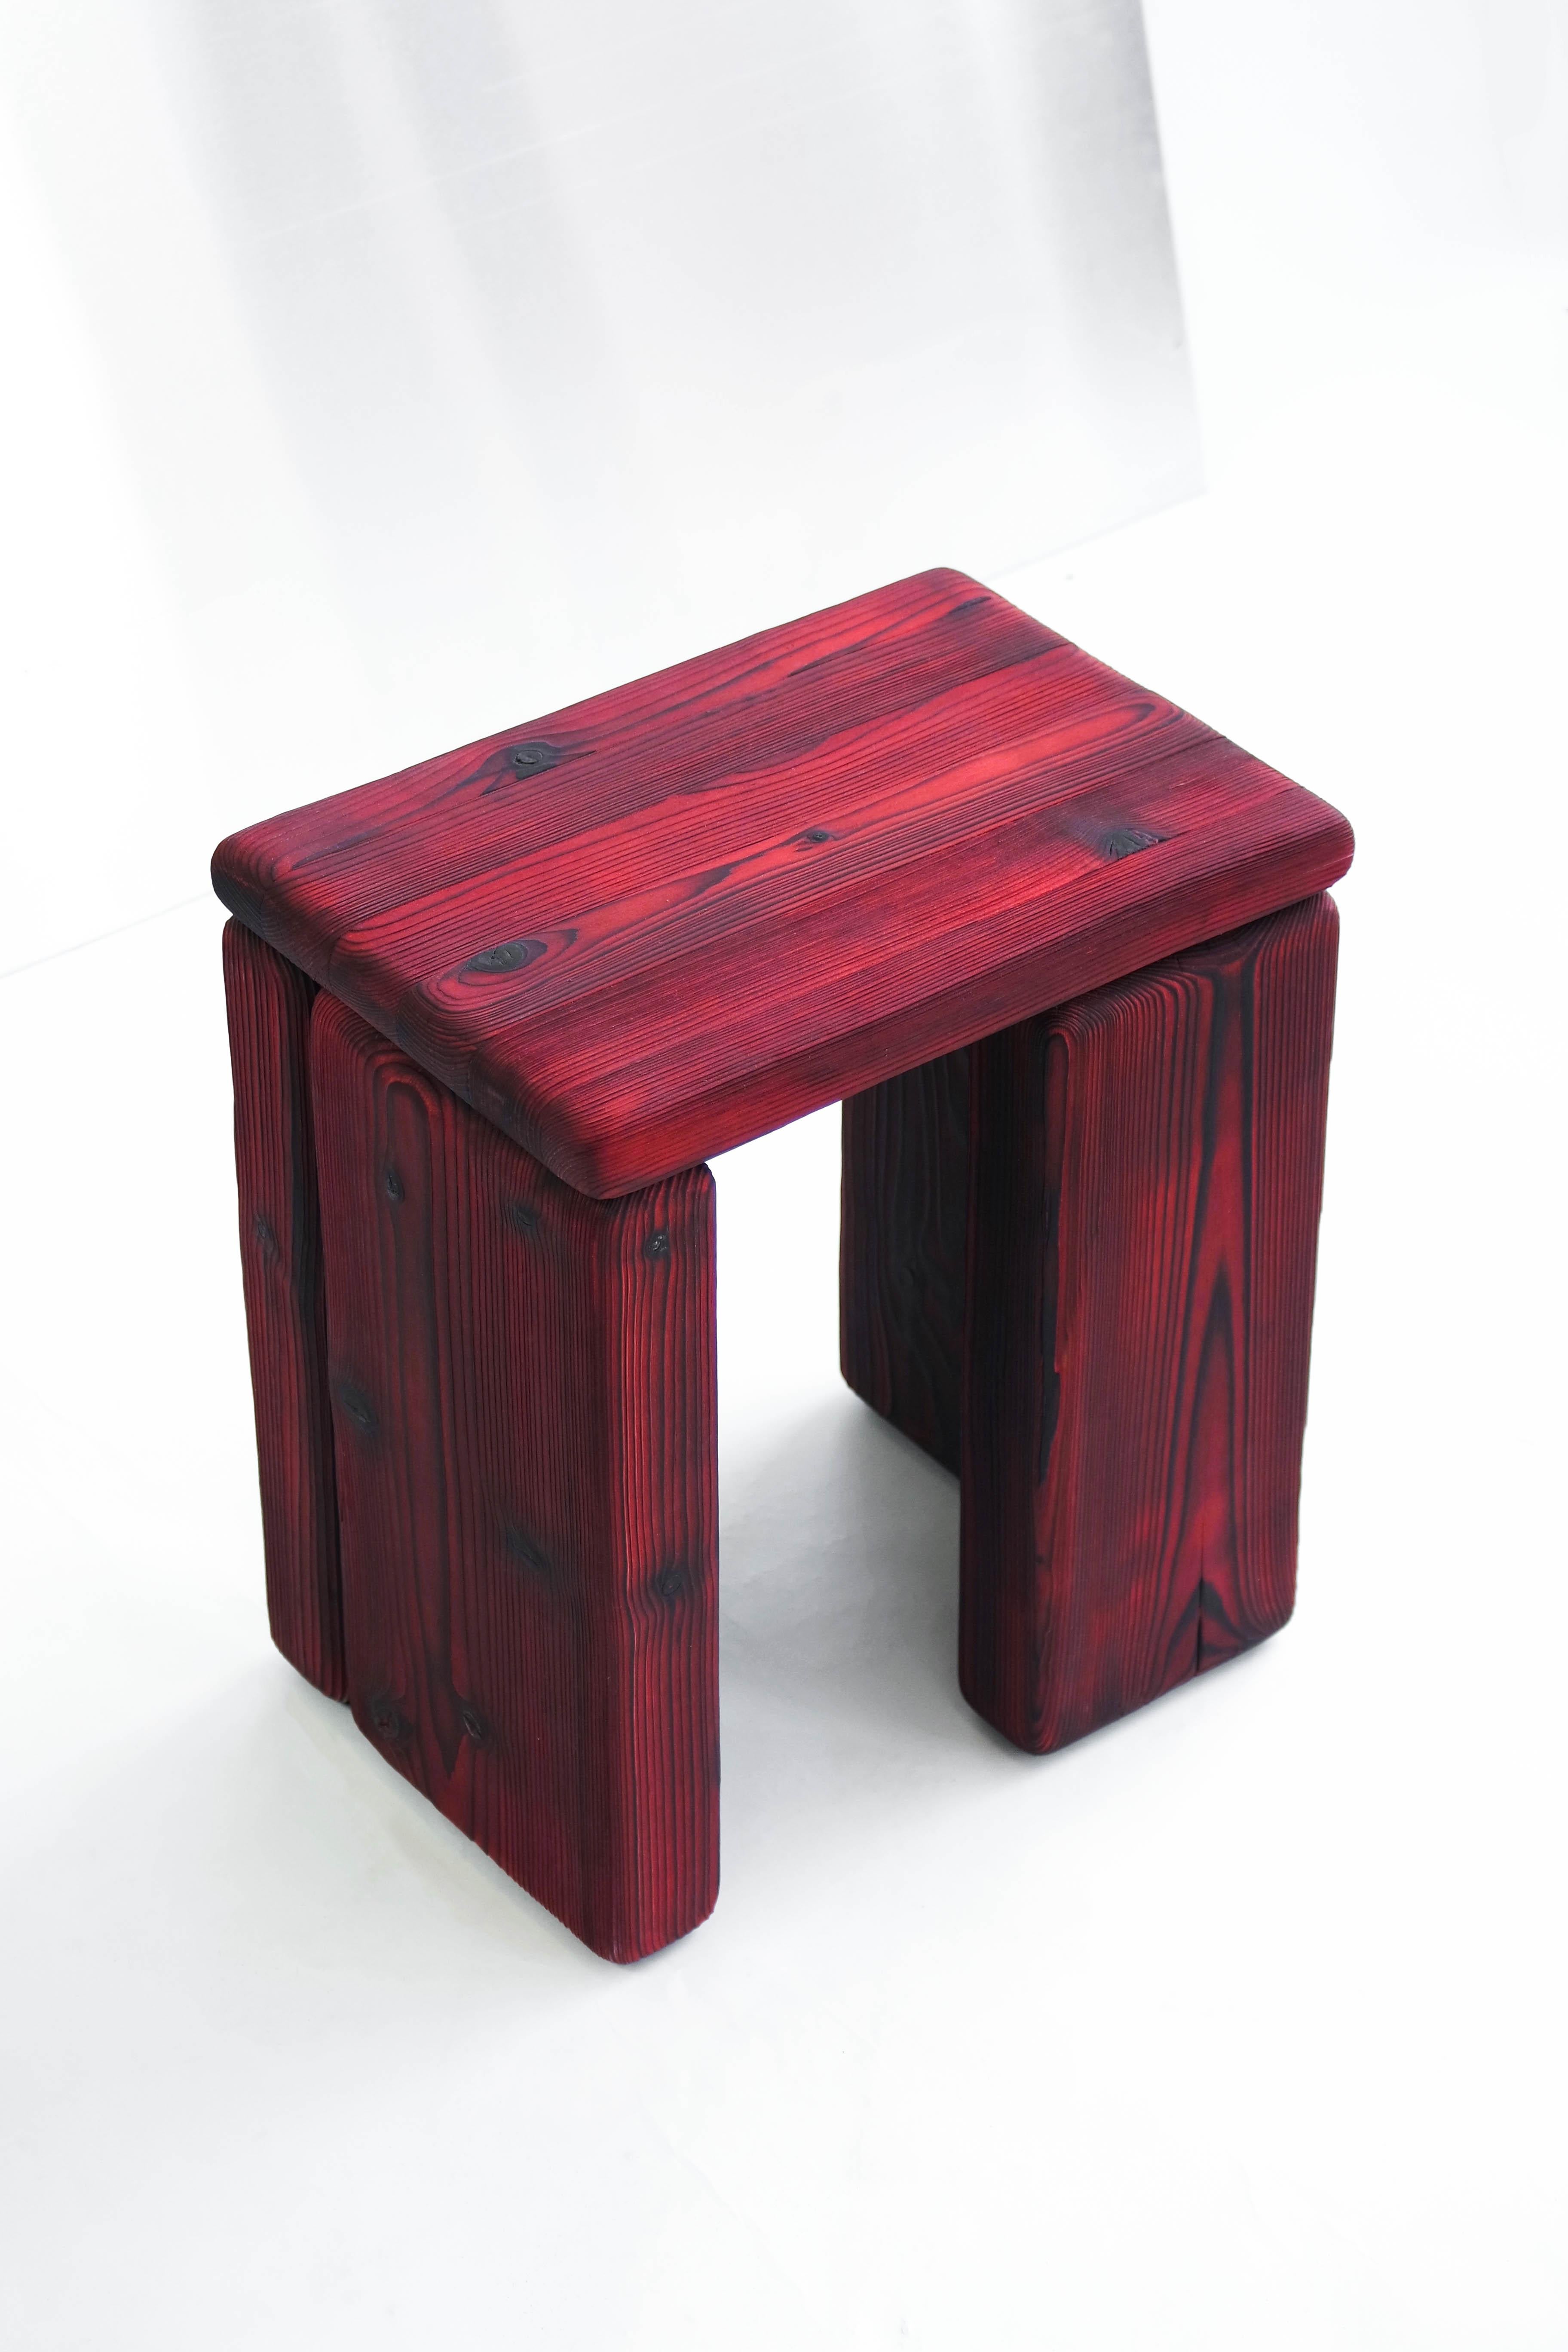 Dutch Timber Stool Burned Pine by Onno Adriaanse For Sale